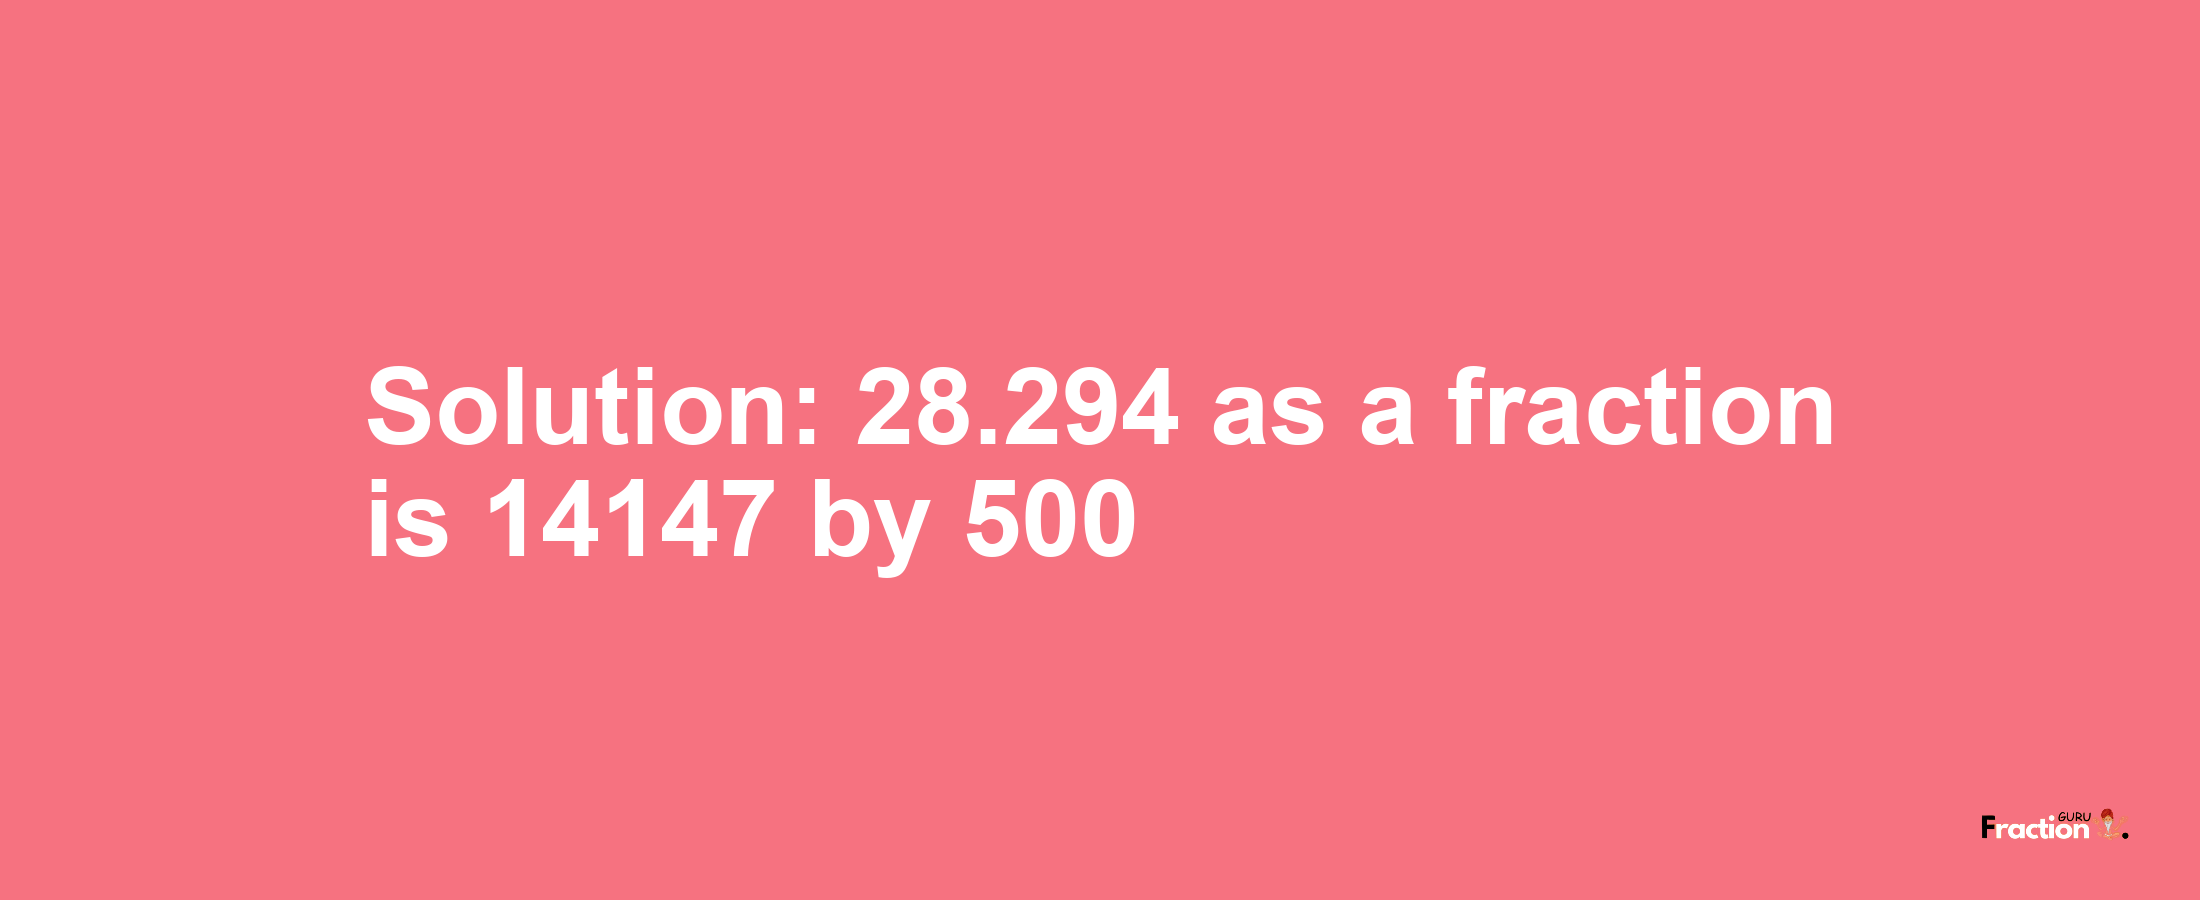 Solution:28.294 as a fraction is 14147/500